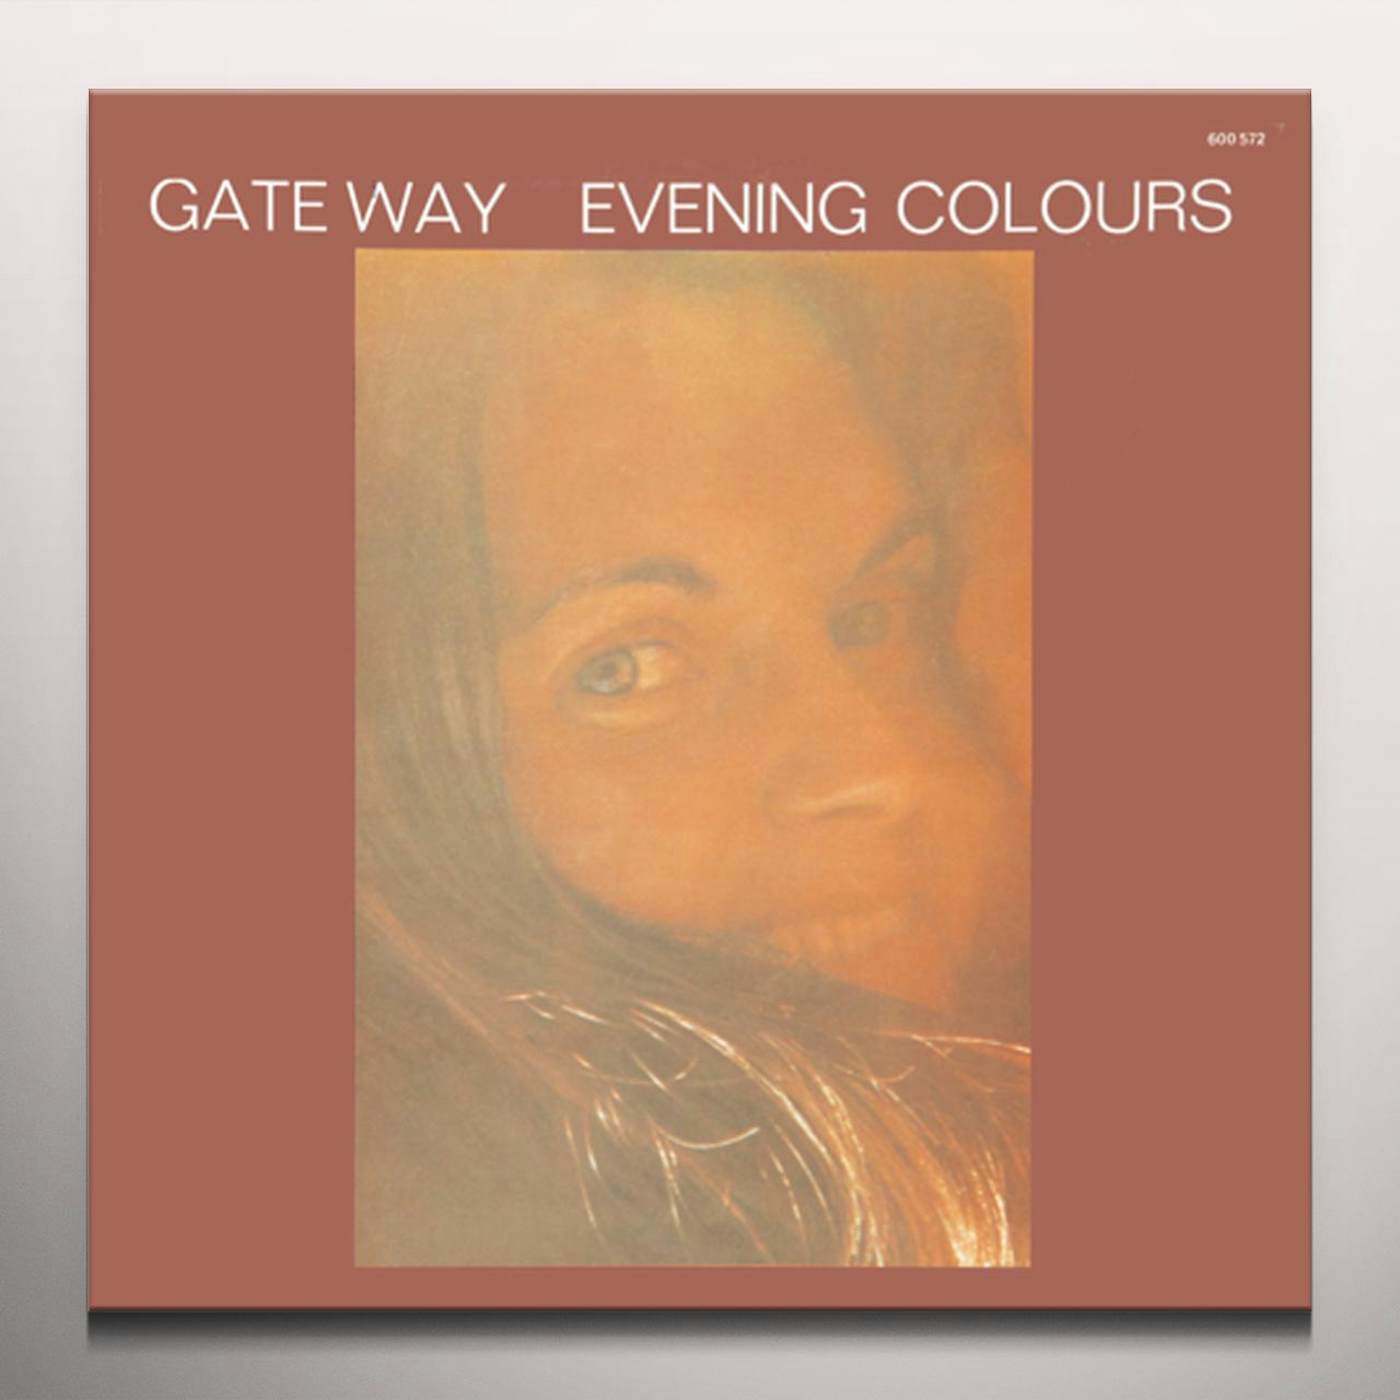 Laurence Vanay EVENING COLOURS Vinyl Record - Limited Edition, Reissue, Remastered, Colored Vinyl, 180 Gram Pressing